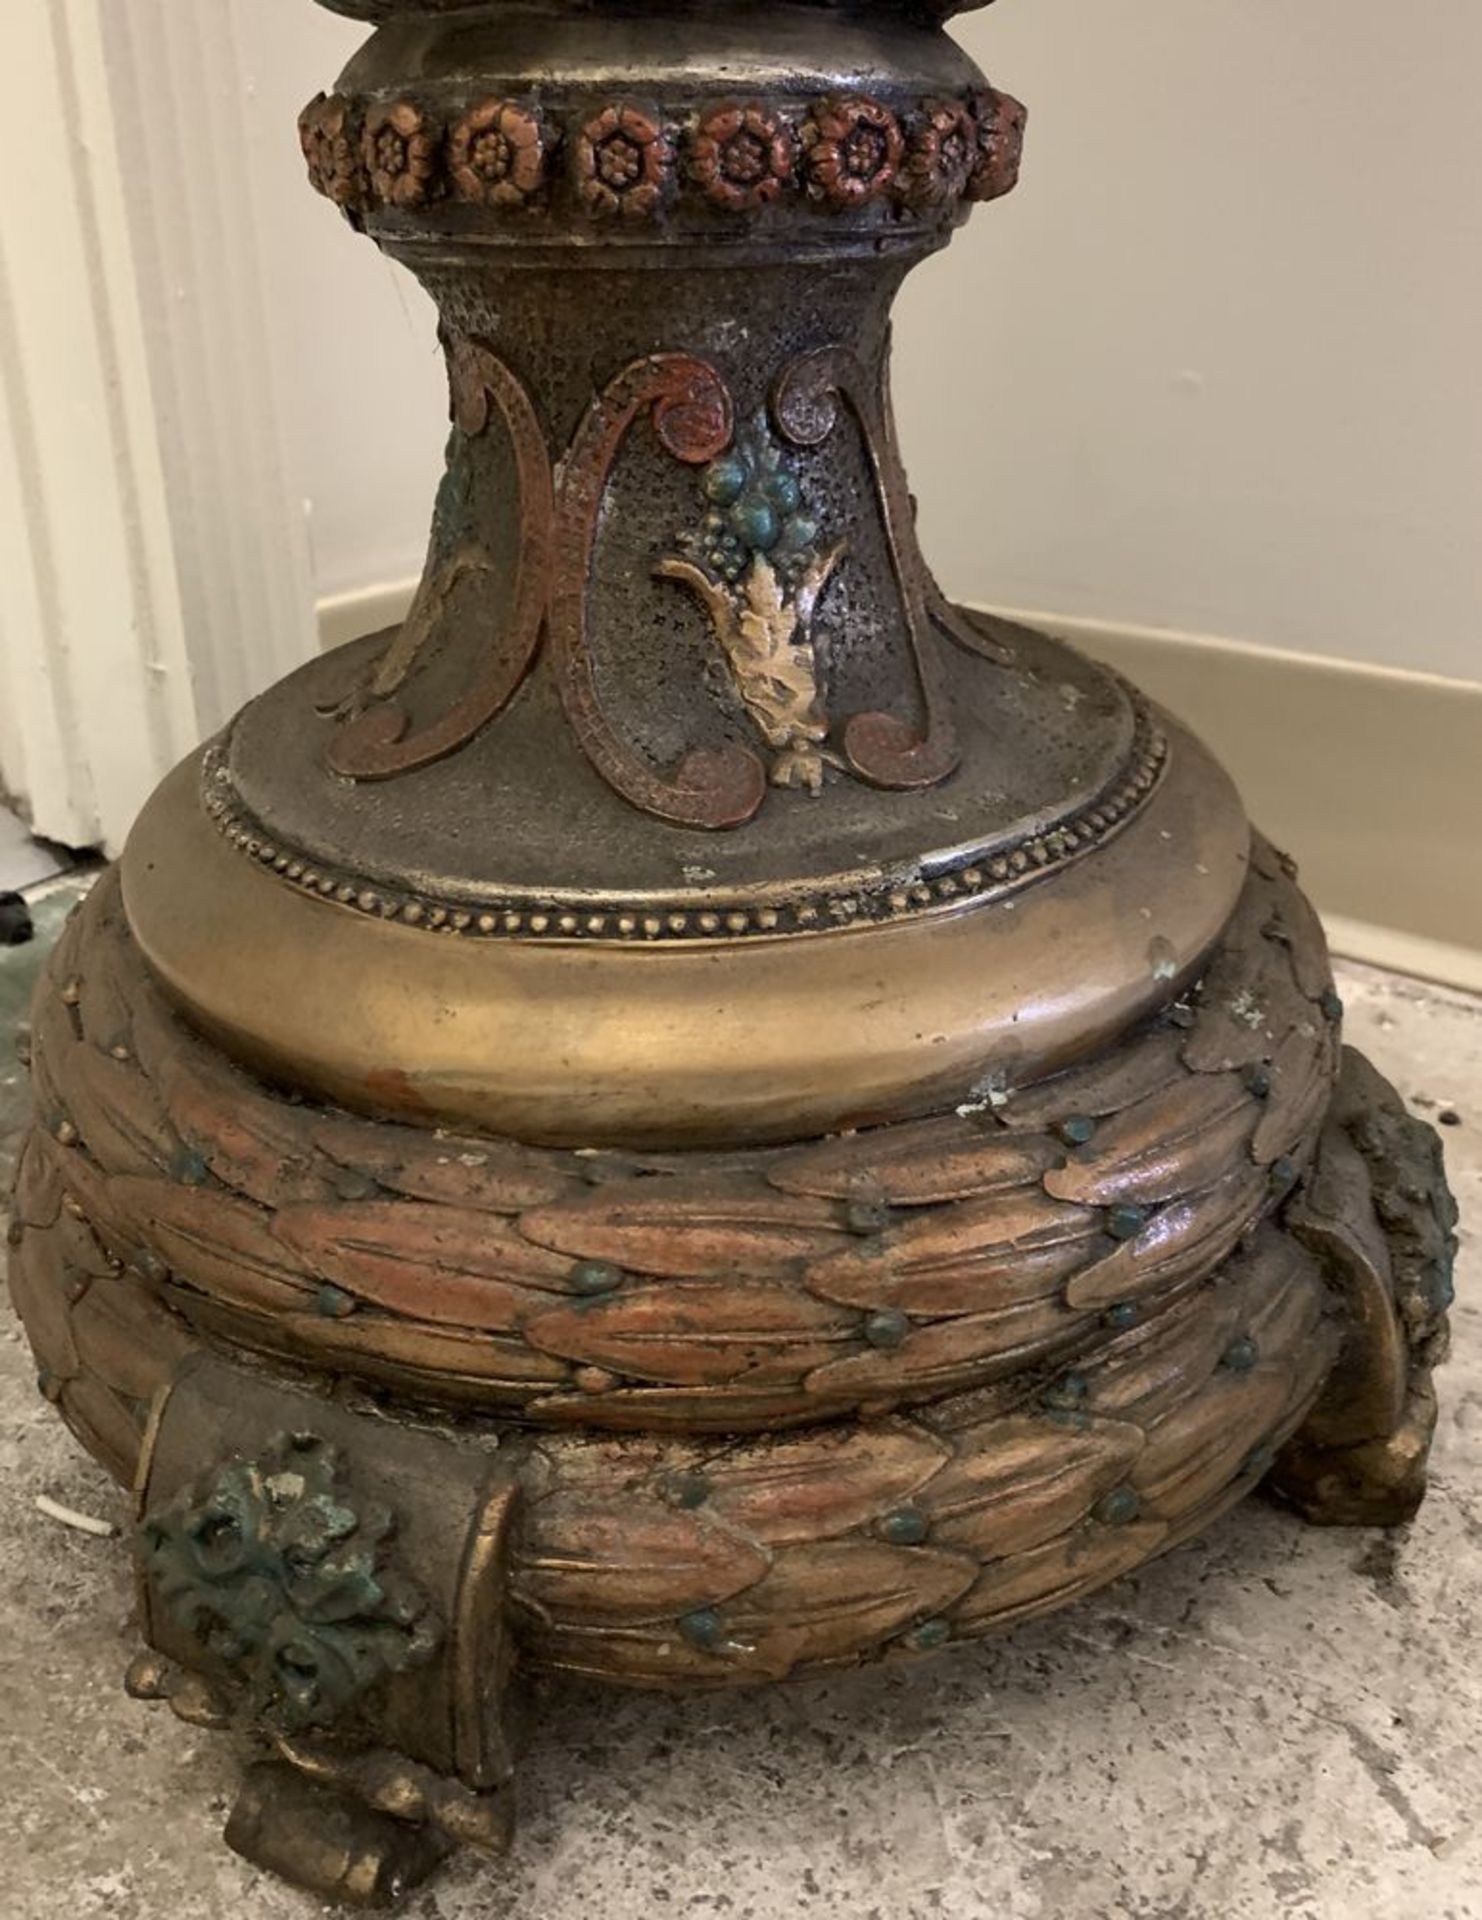 Bronze Vintage Urn Vase, Stands around 3.5' tall **If won, must be picked up in Chatsworth, CA. - Image 5 of 5